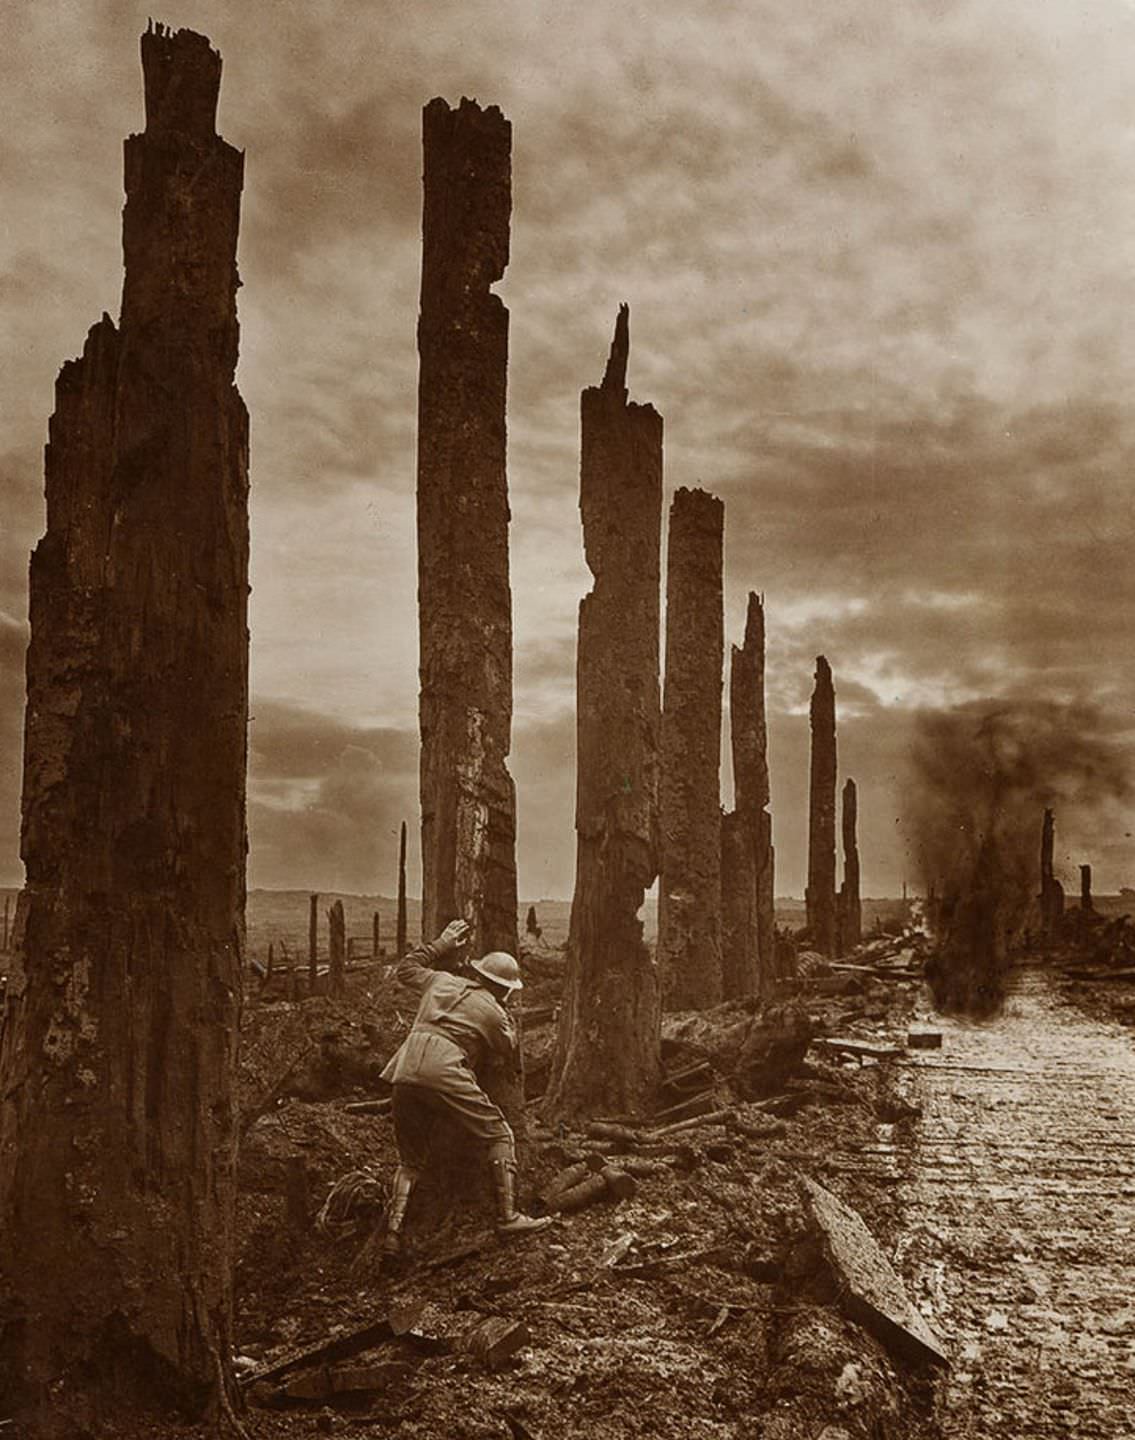 A Soldier's Perspective: Frank Hurley's WWI Western Front Photography